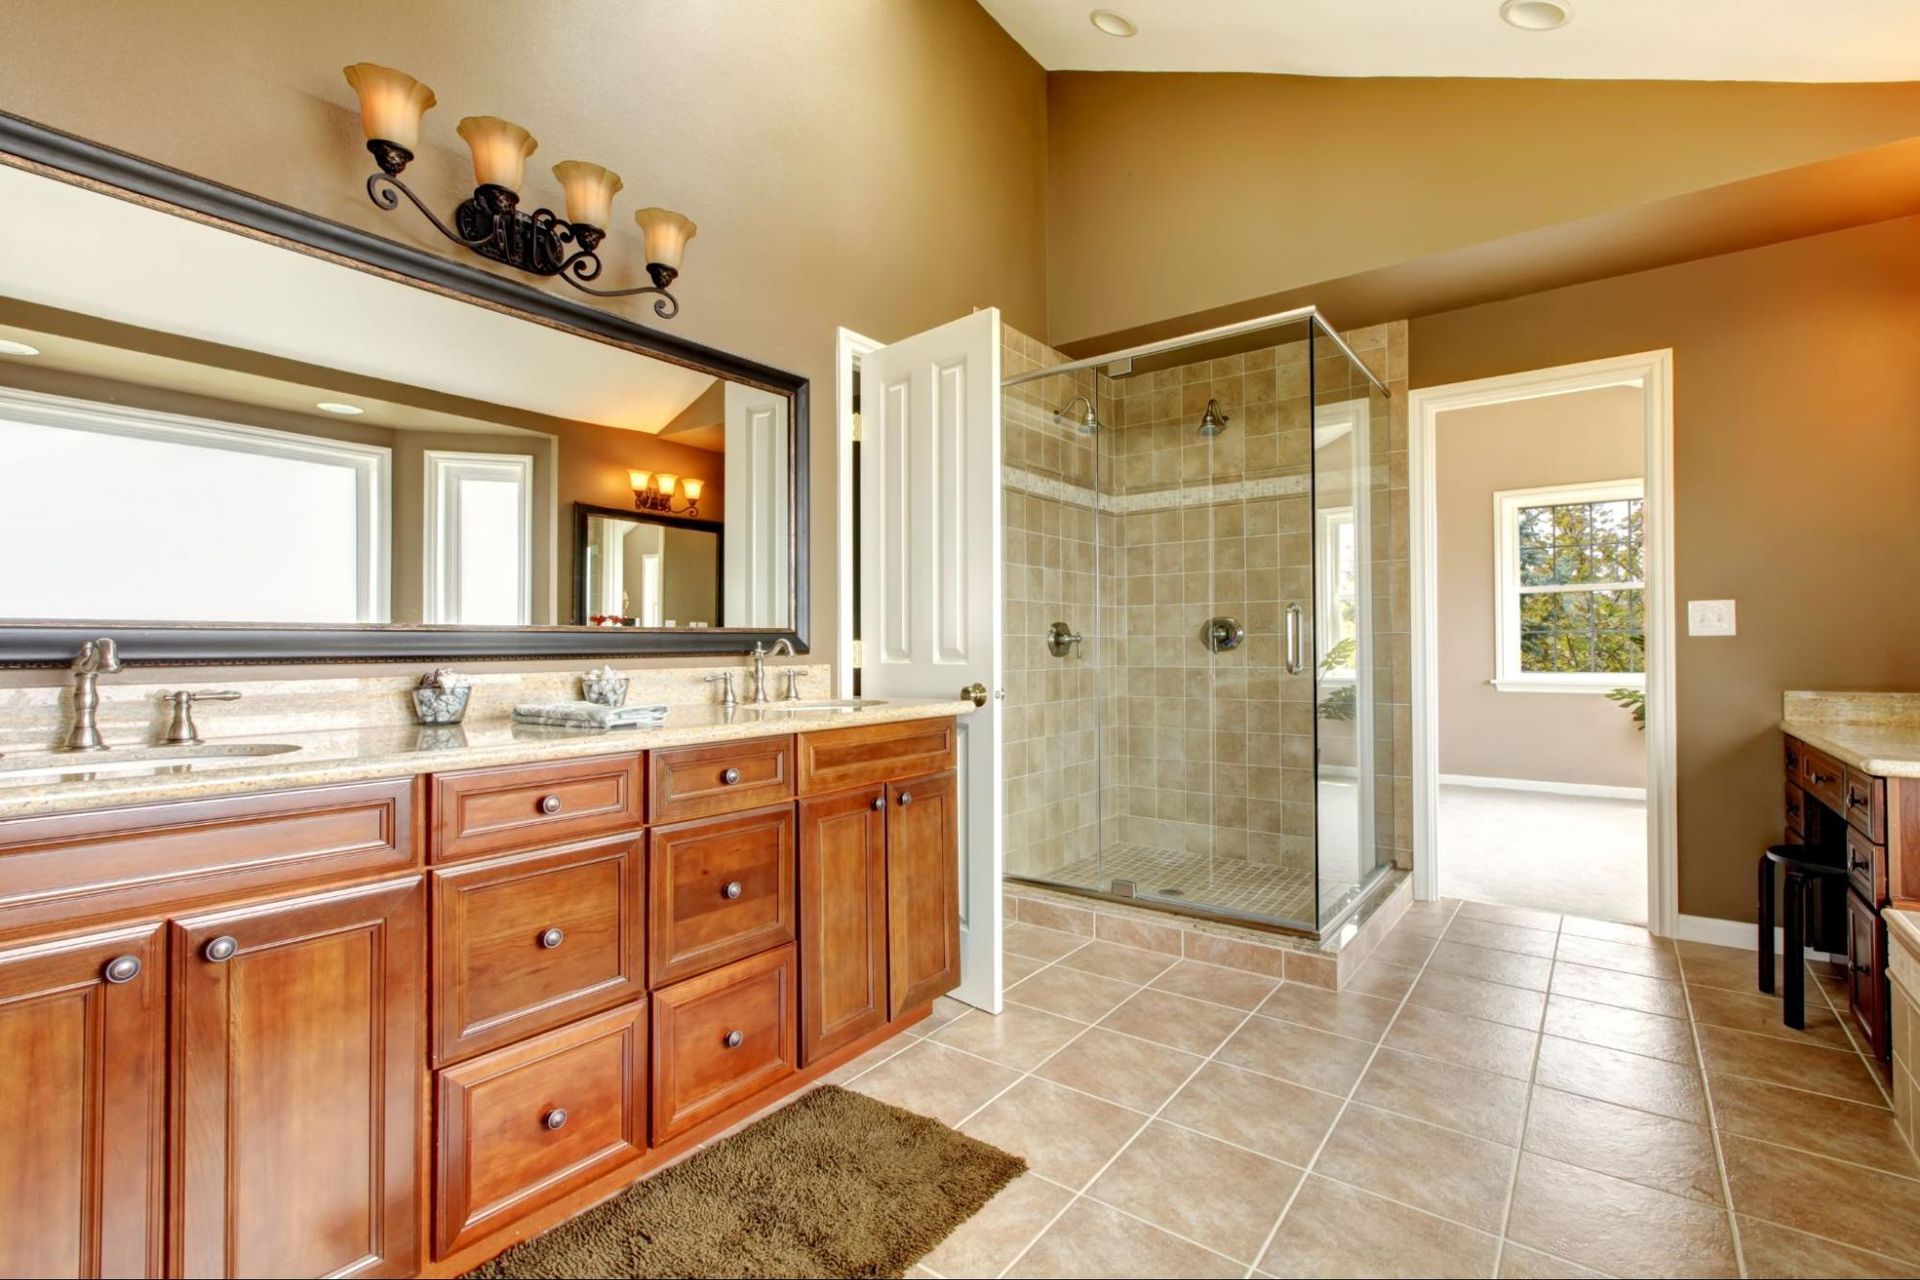 A bathroom with two sinks and a walk in shower.